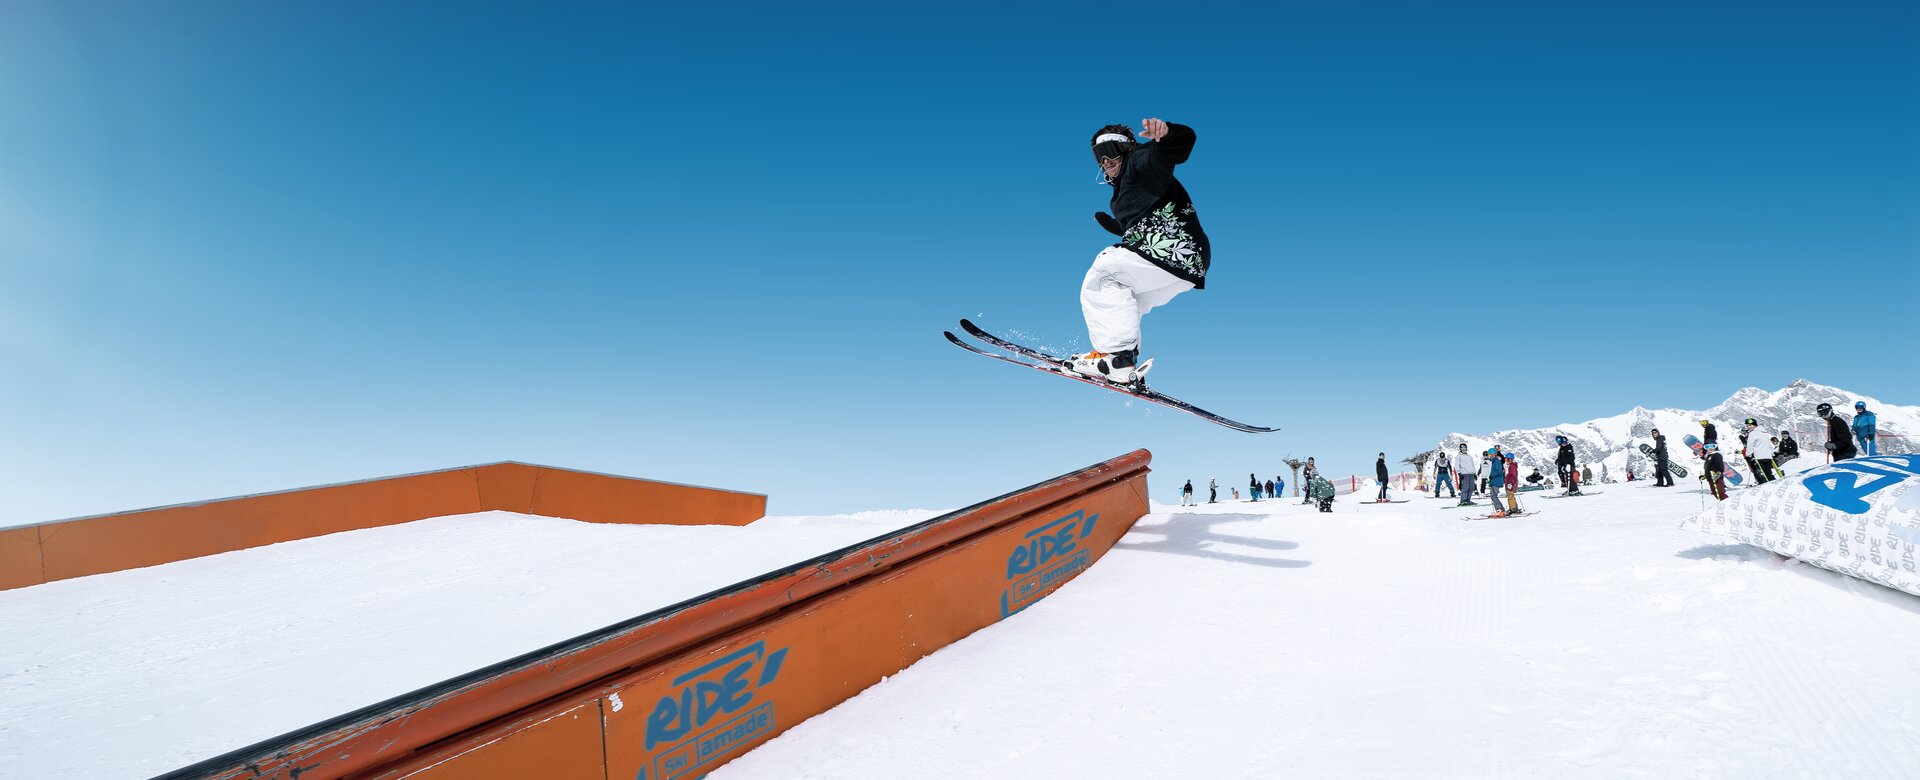 Freestyler jumps with cross-positioned skis onto a metal device on which you can slide down